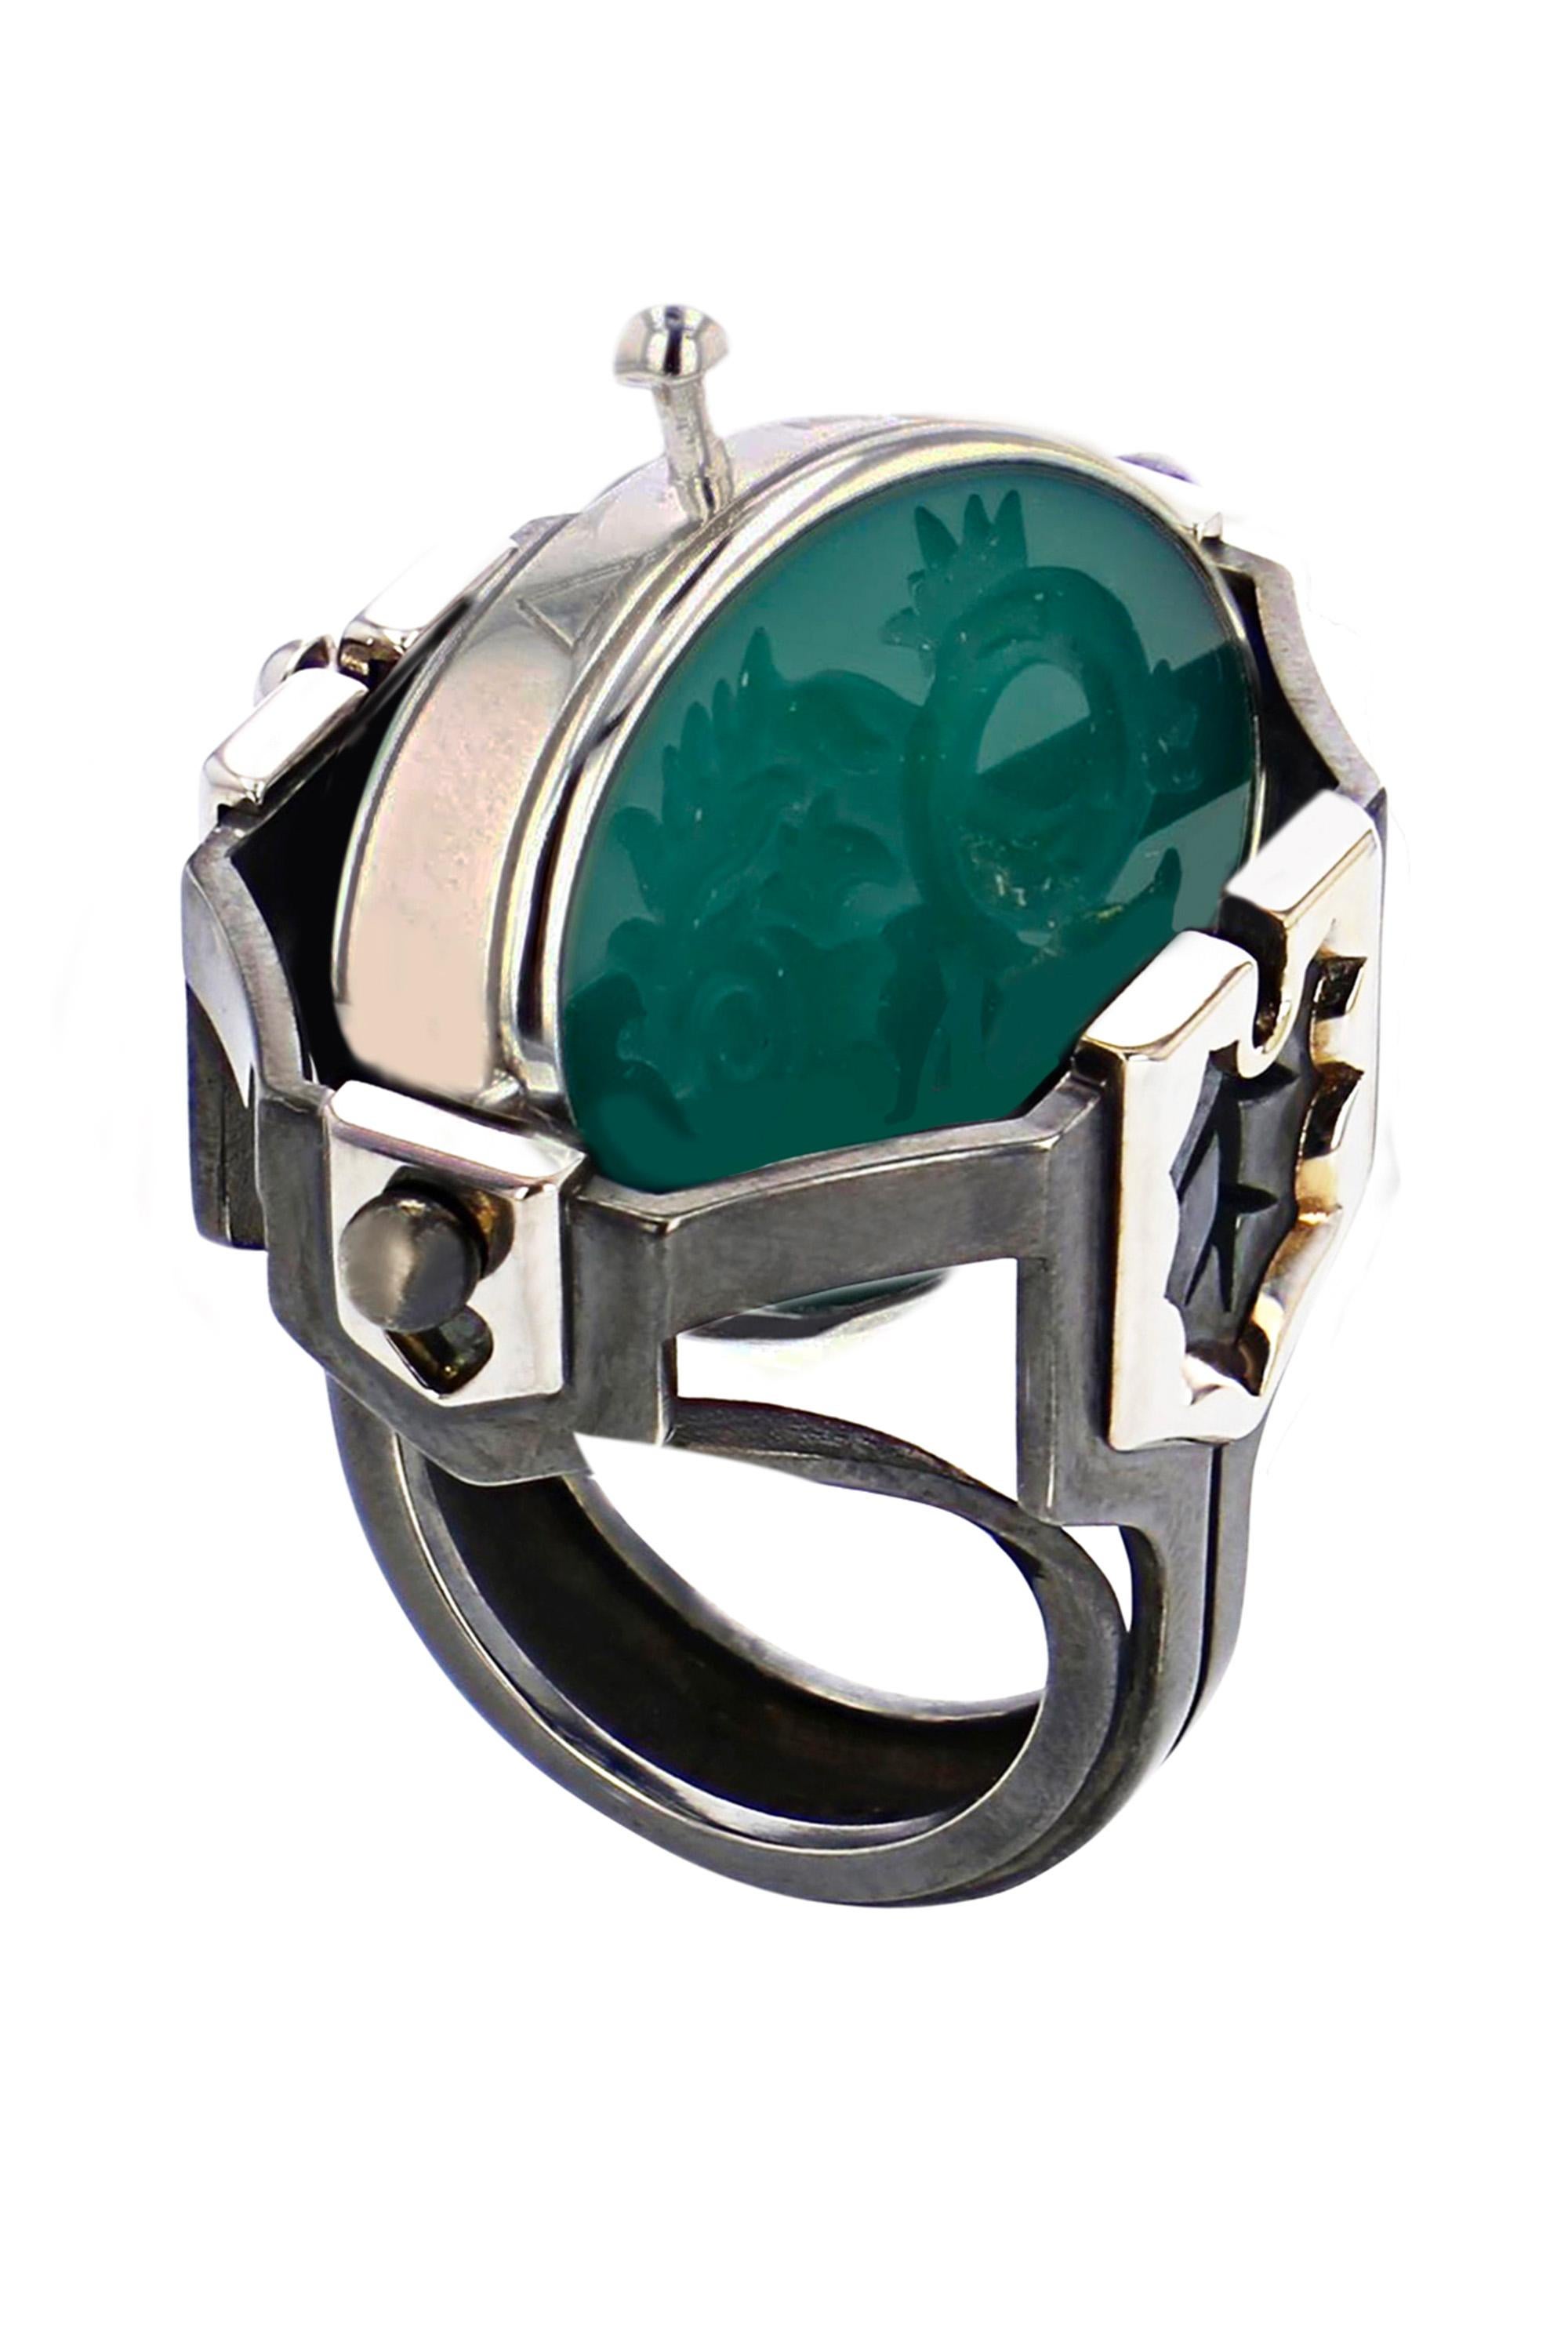 White gold and distressed silver ring. Rotating medallion : on the gold side are engraved Water signs (Cancer, Scorpio, Pisces) and on the green agate, a fish.

Details:
Green Agate
3 Diamonds: 0.1 cts
18k White Gold: 18g
Distressed Silver: 11g
Made